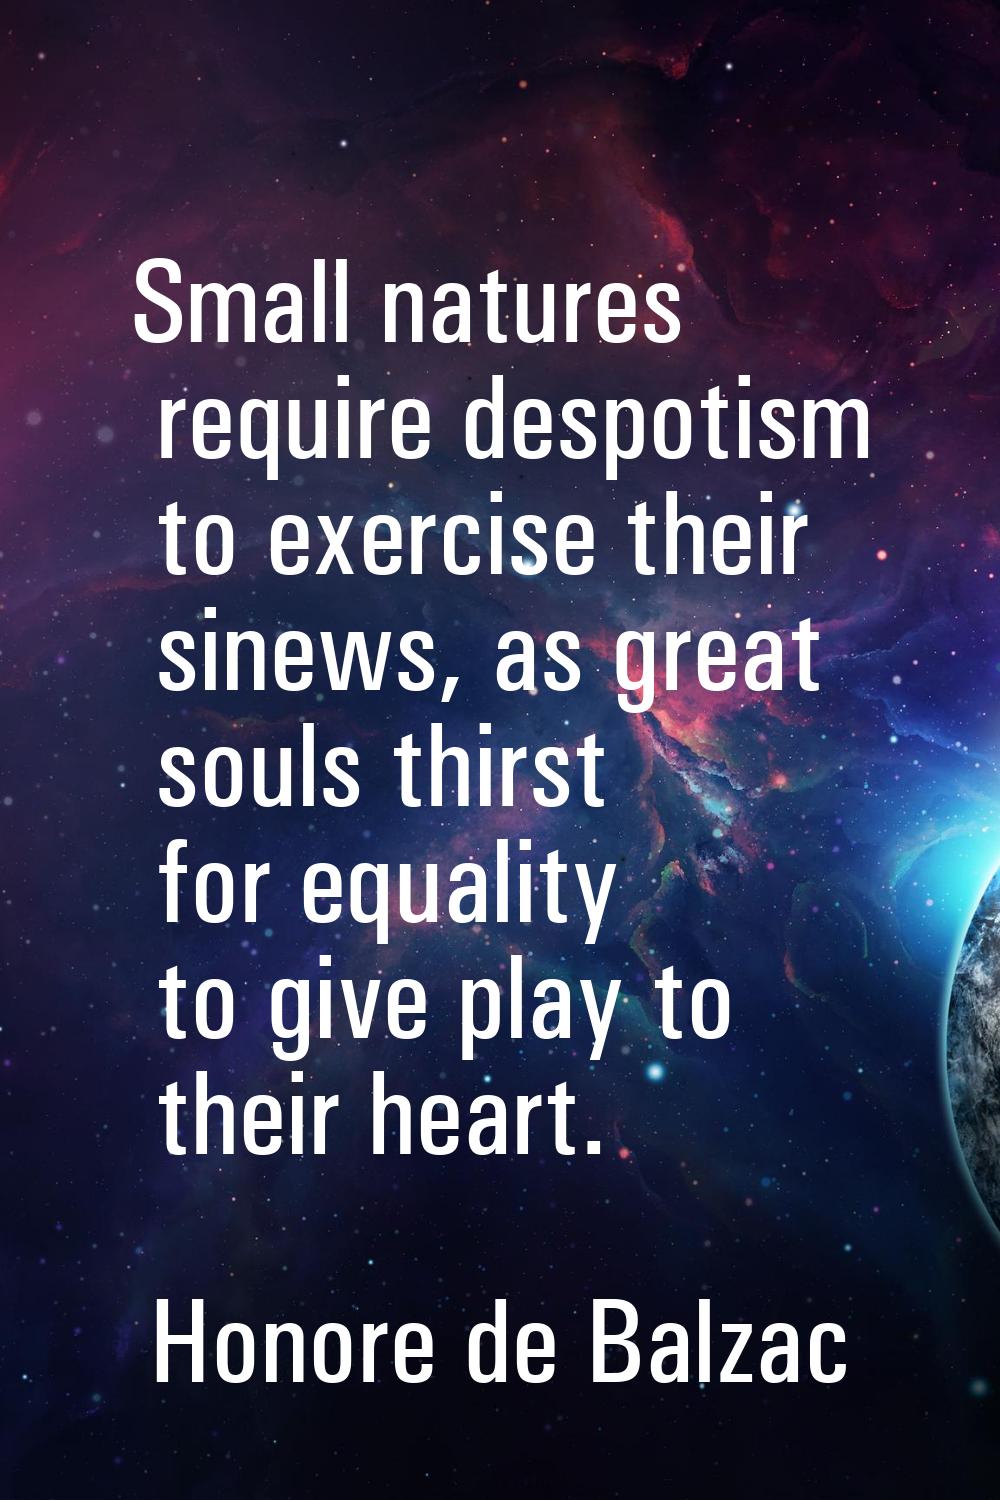 Small natures require despotism to exercise their sinews, as great souls thirst for equality to giv